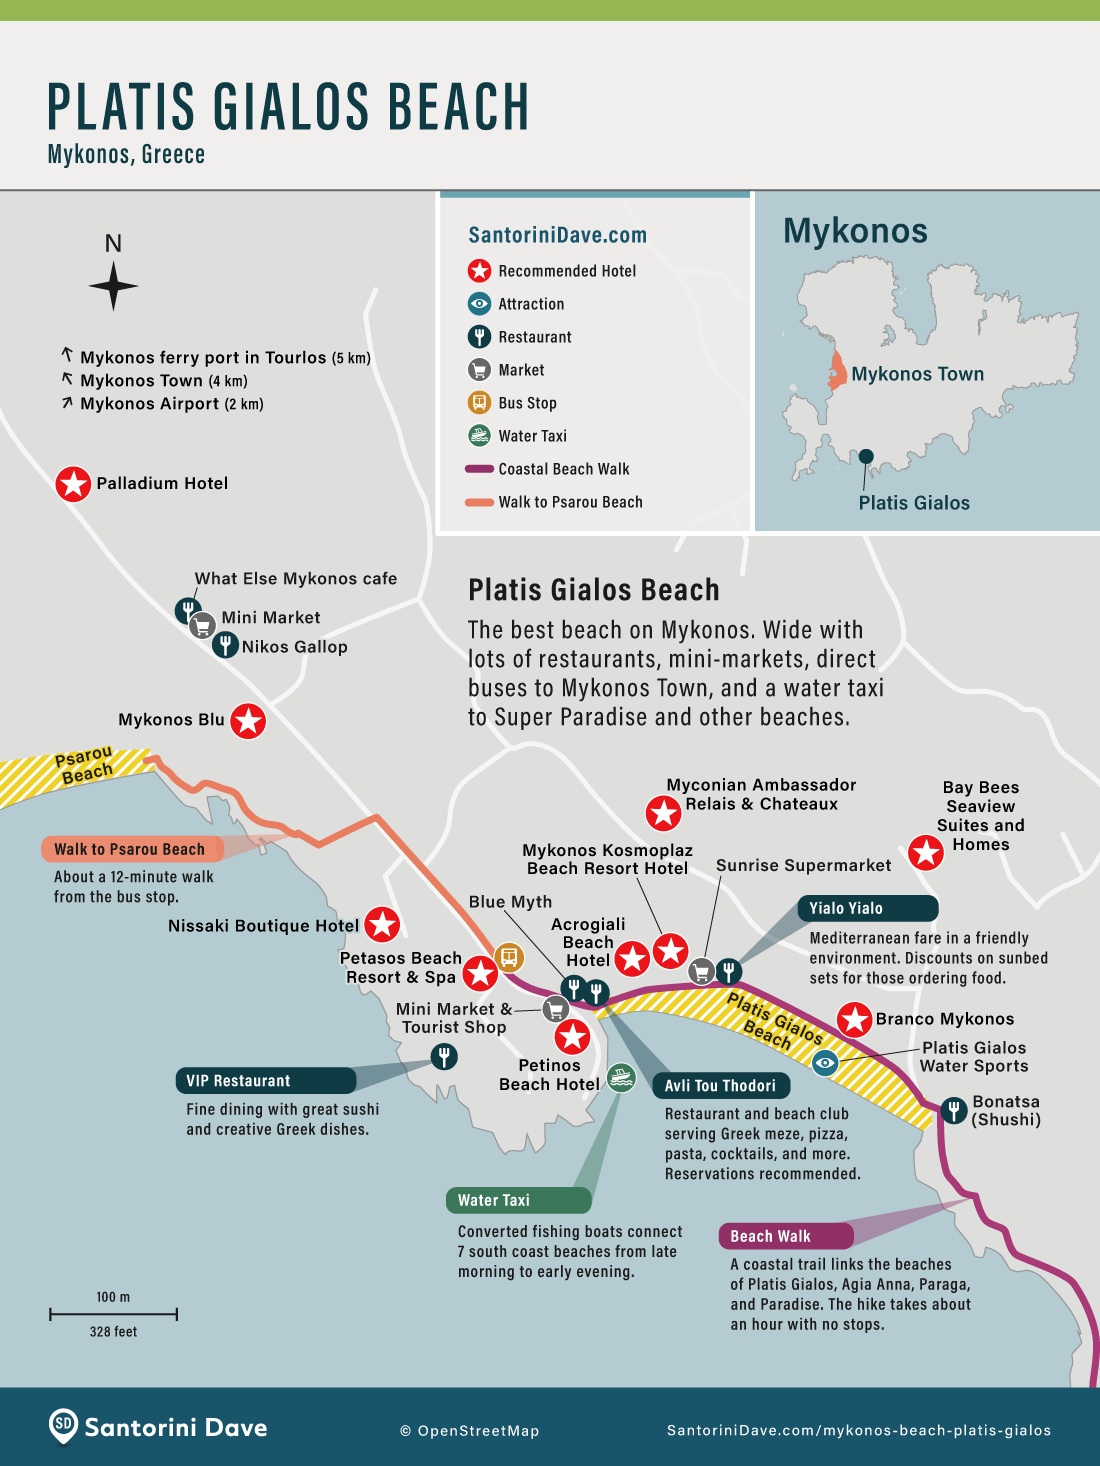 Map showing points of interest in and around Platis Gialos Beach